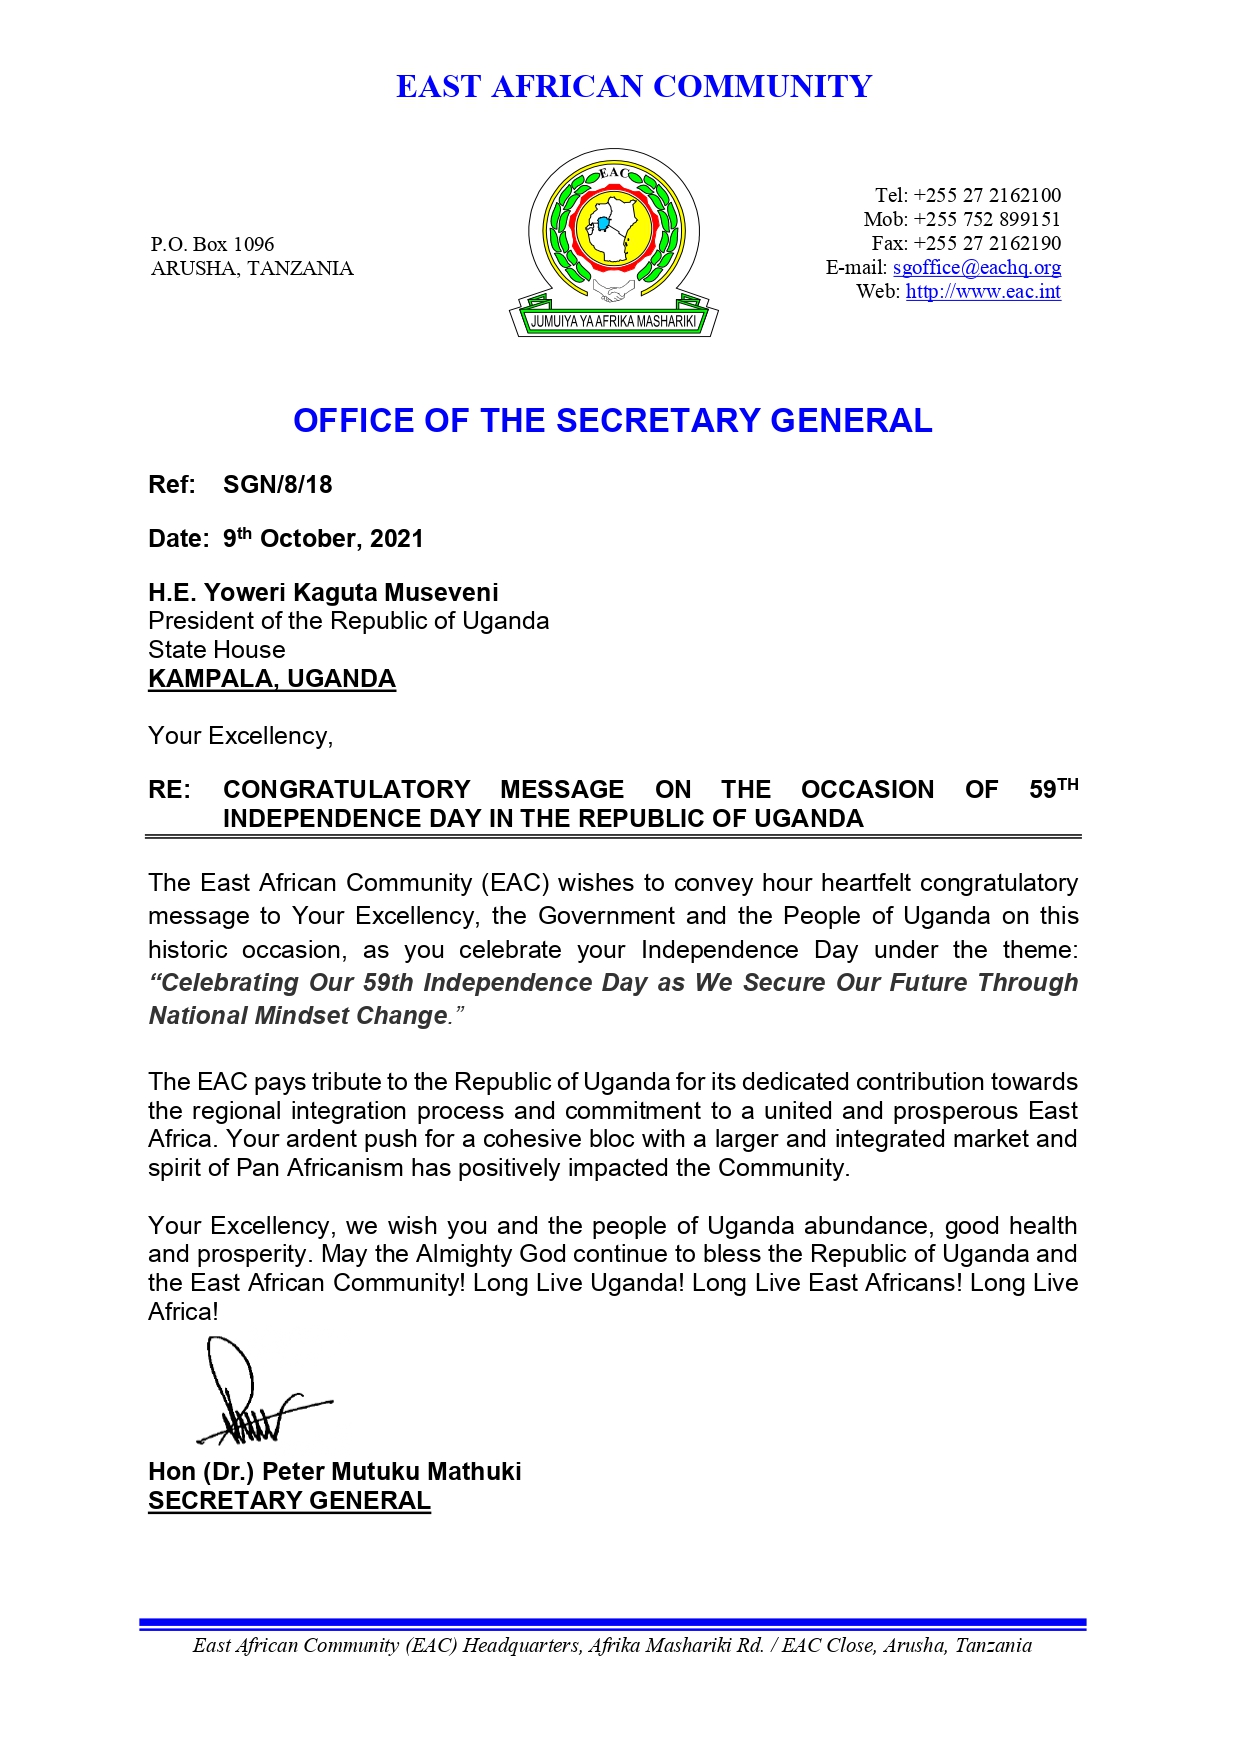 CONGRATULATORY MESSAGE ON THE OCCASION OF INDEPENDENCE DAY IN THE REPUBLIC OF UGANDA page 0001